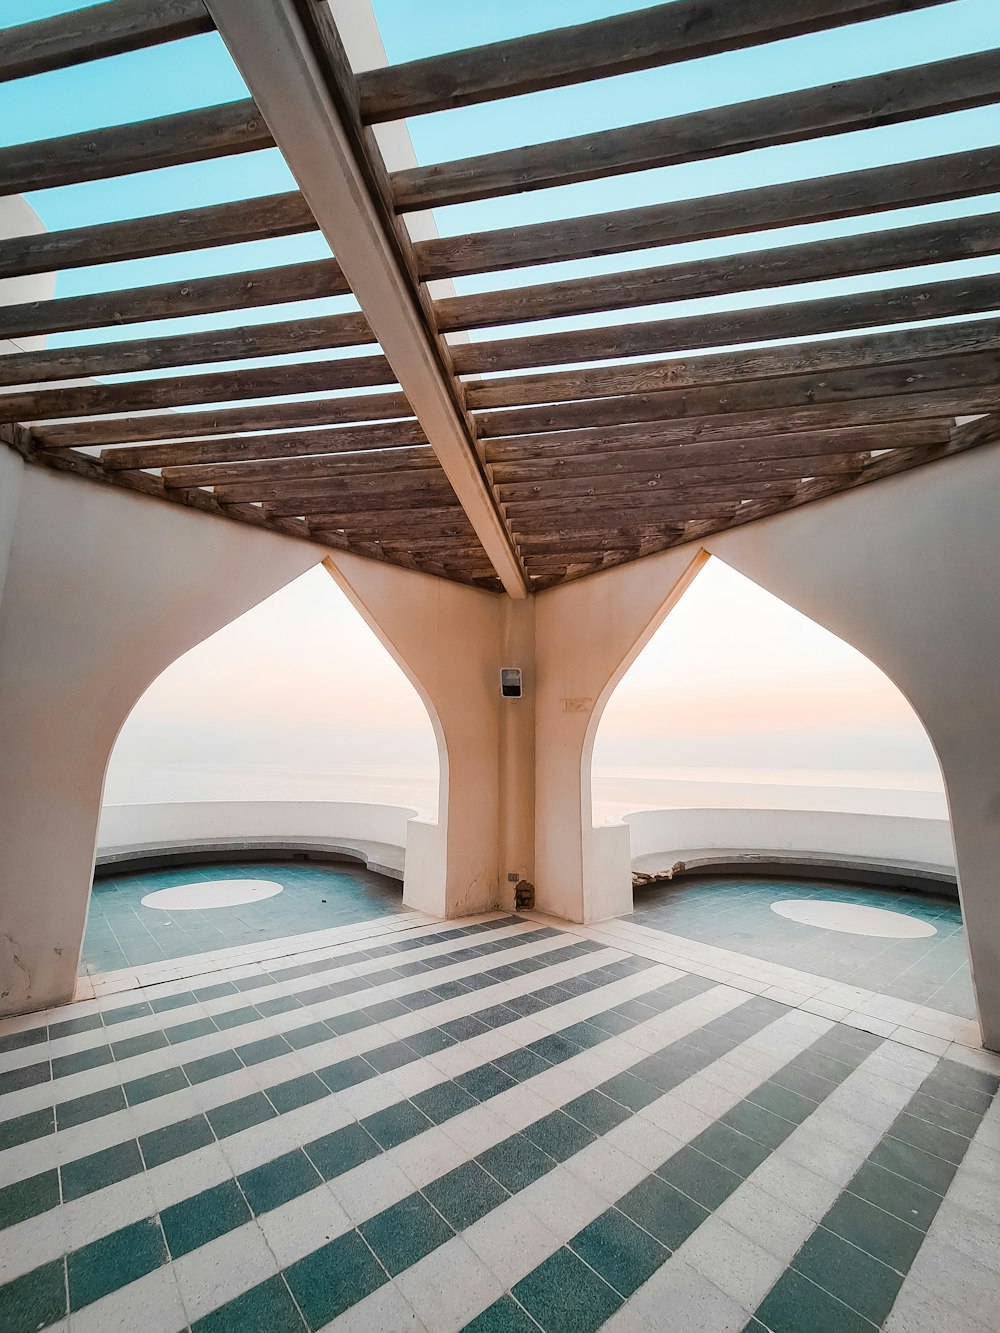 a room with a tiled floor and a view of the ocean